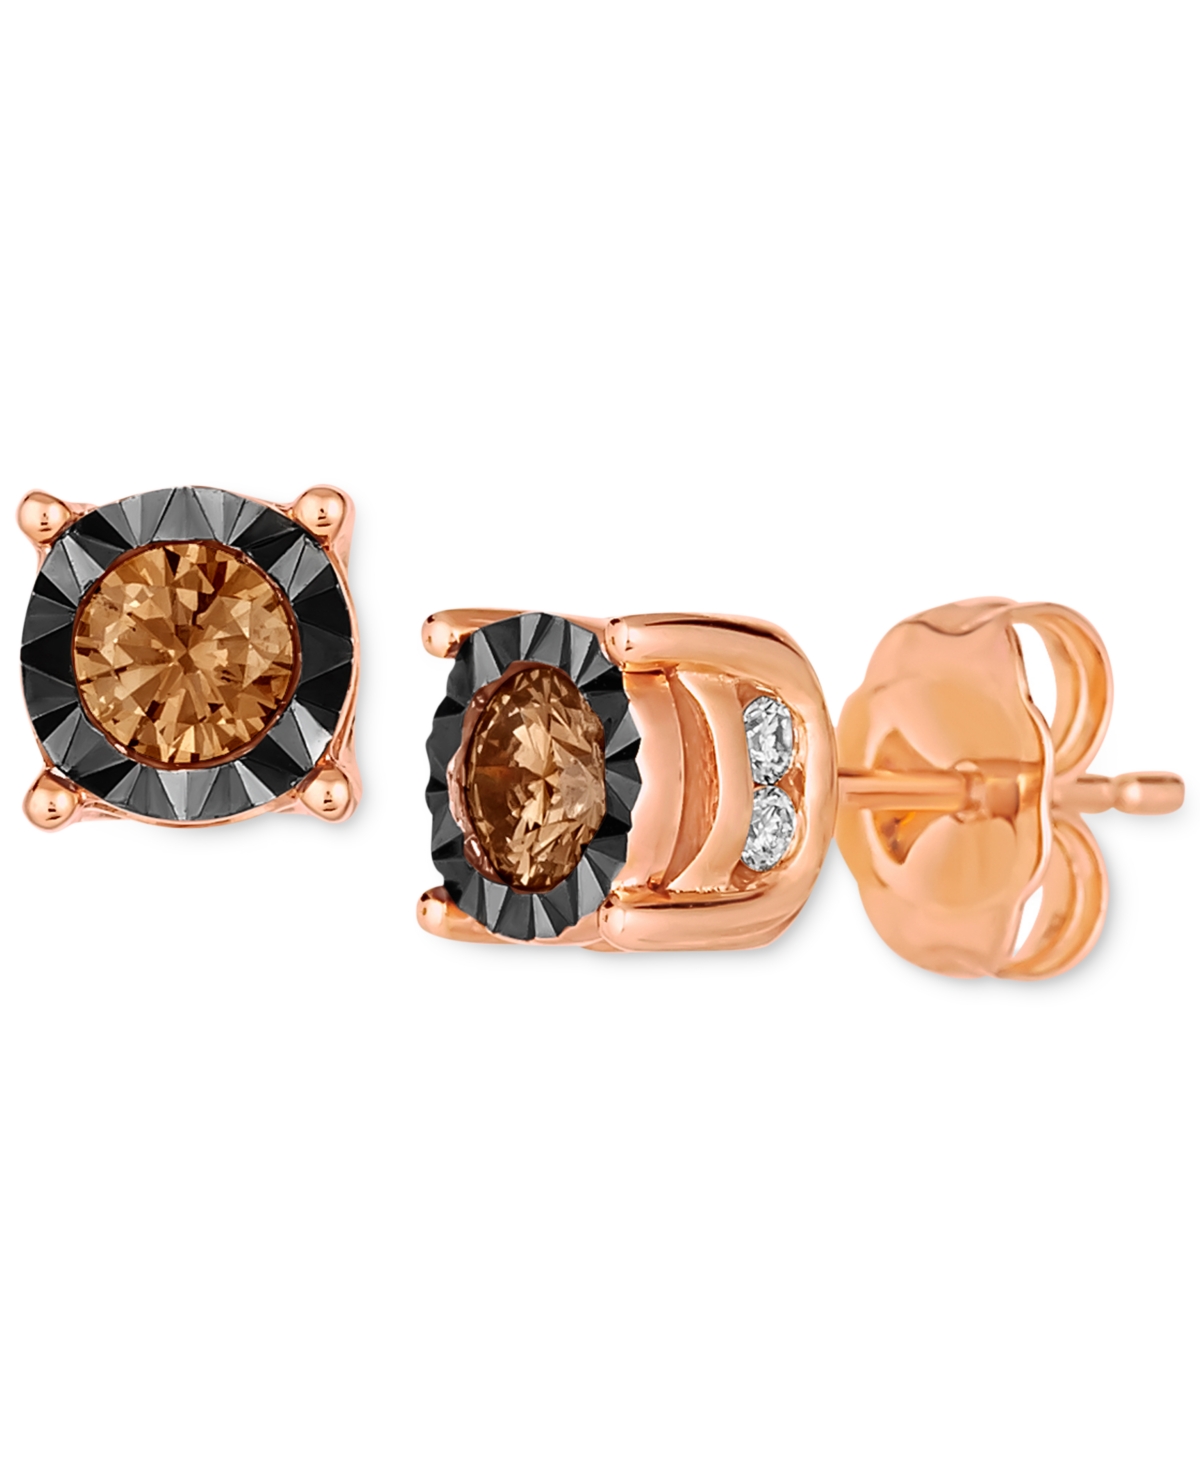 Chocolate Diamond & Nude Diamond Stud Earrings (1/2 ct. t.w) in 14k Rose Gold (Also Available in White Gold or Yellow Gold) - K Strawberry Gol